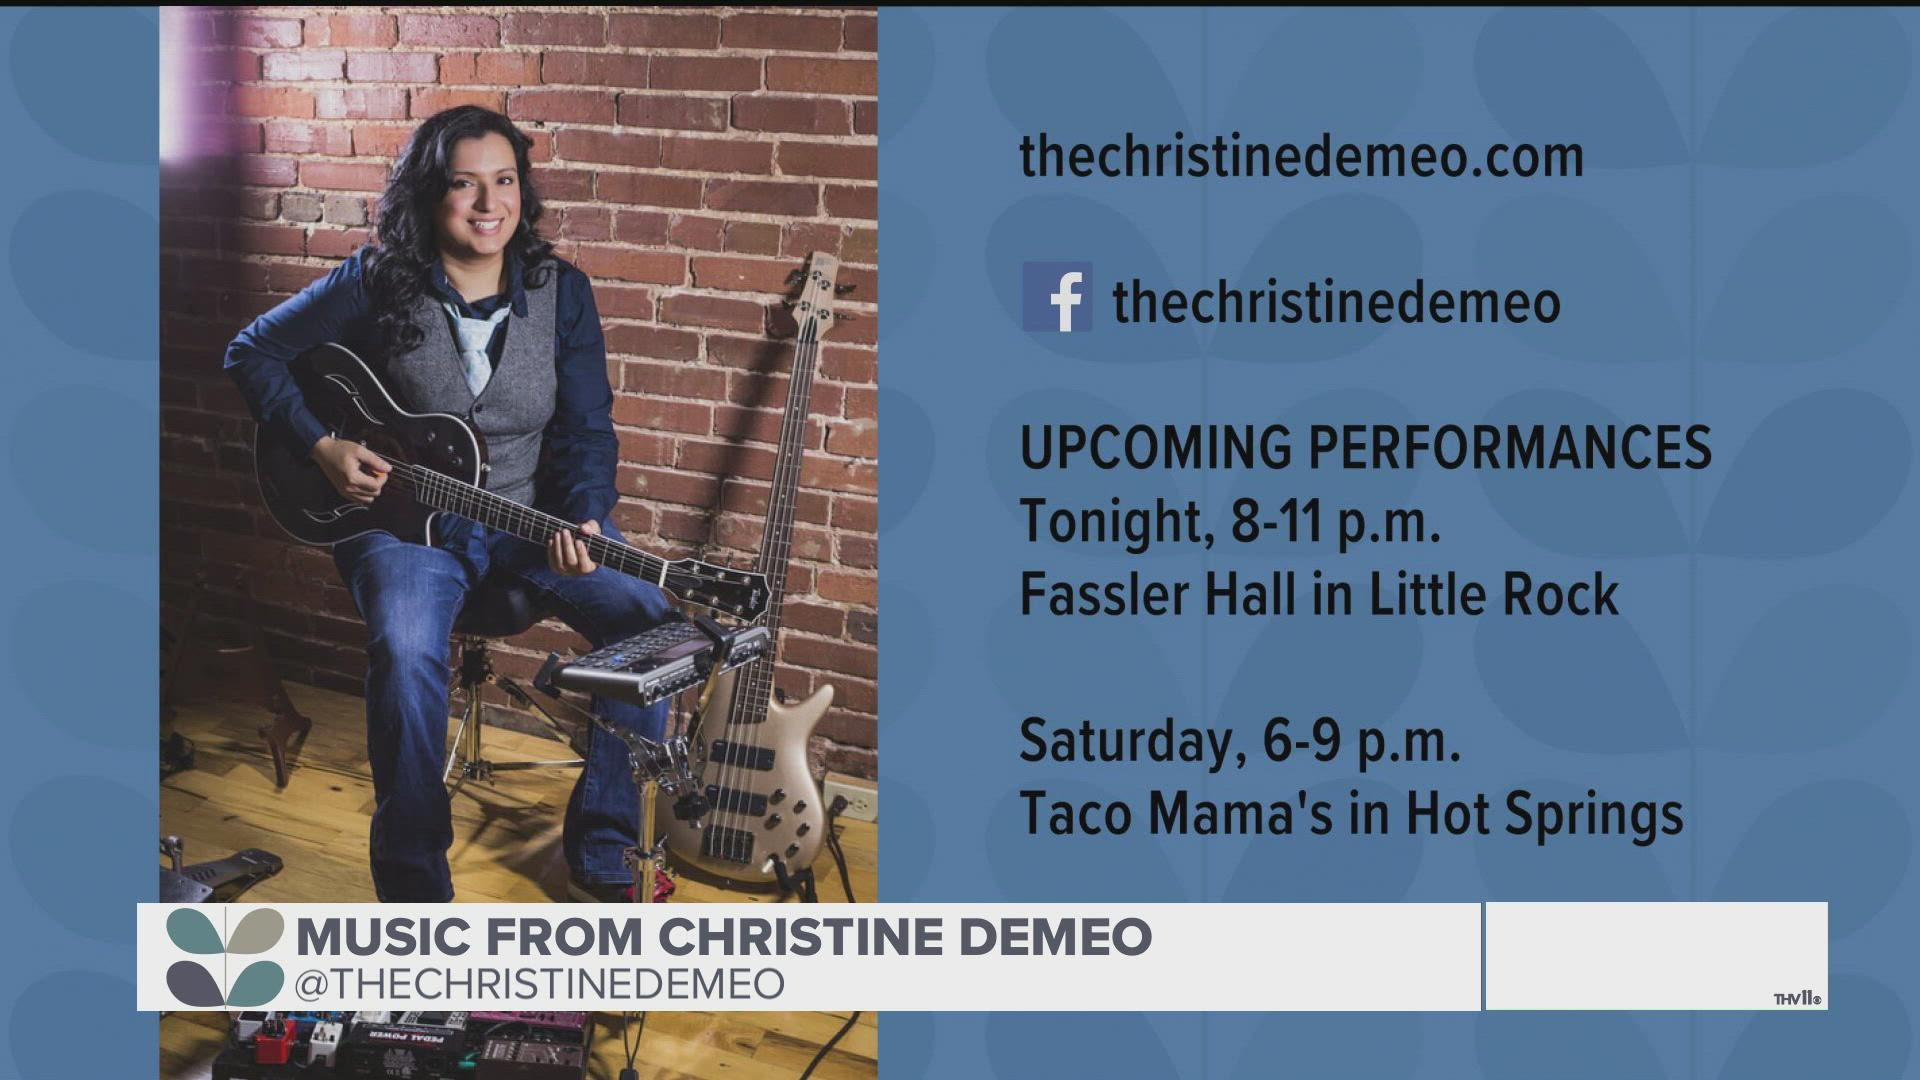 We listened to Christine DeMeo all morning, now, let's get to know more about her.